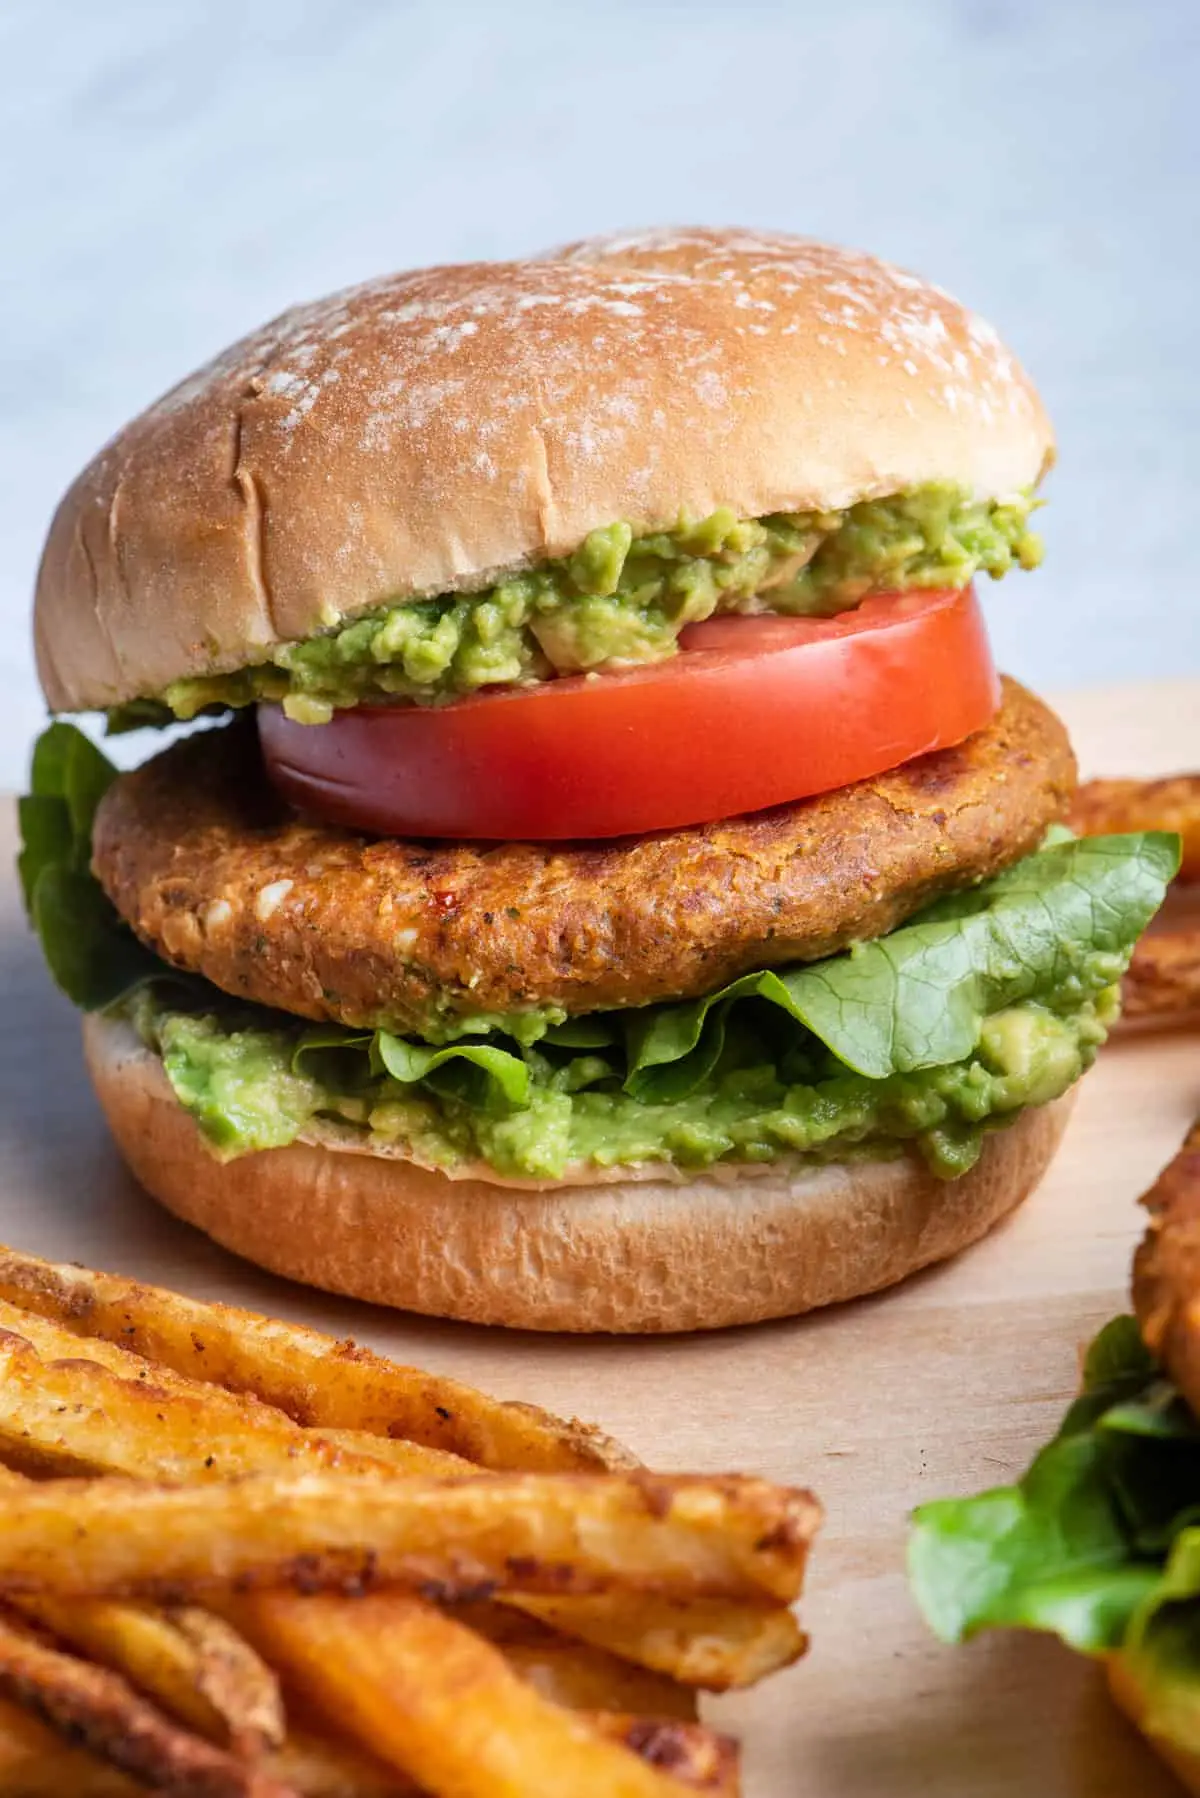 chickpea burger with tomato and lettuce on seeded roll